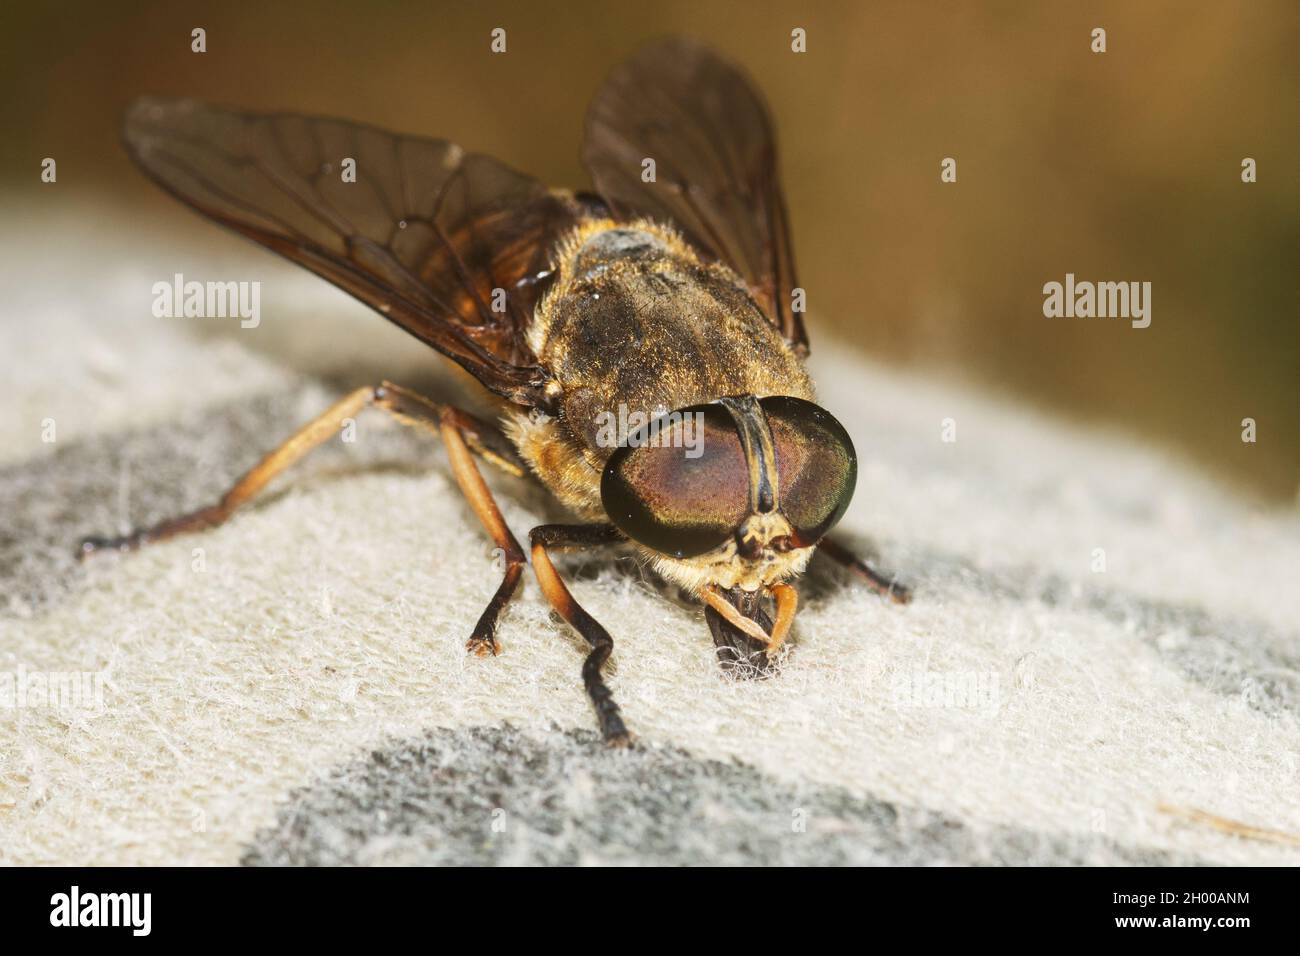 Large Pale giant horse-fly, Tabanus bovinus on a fabric, trying to suck blood. Stock Photo